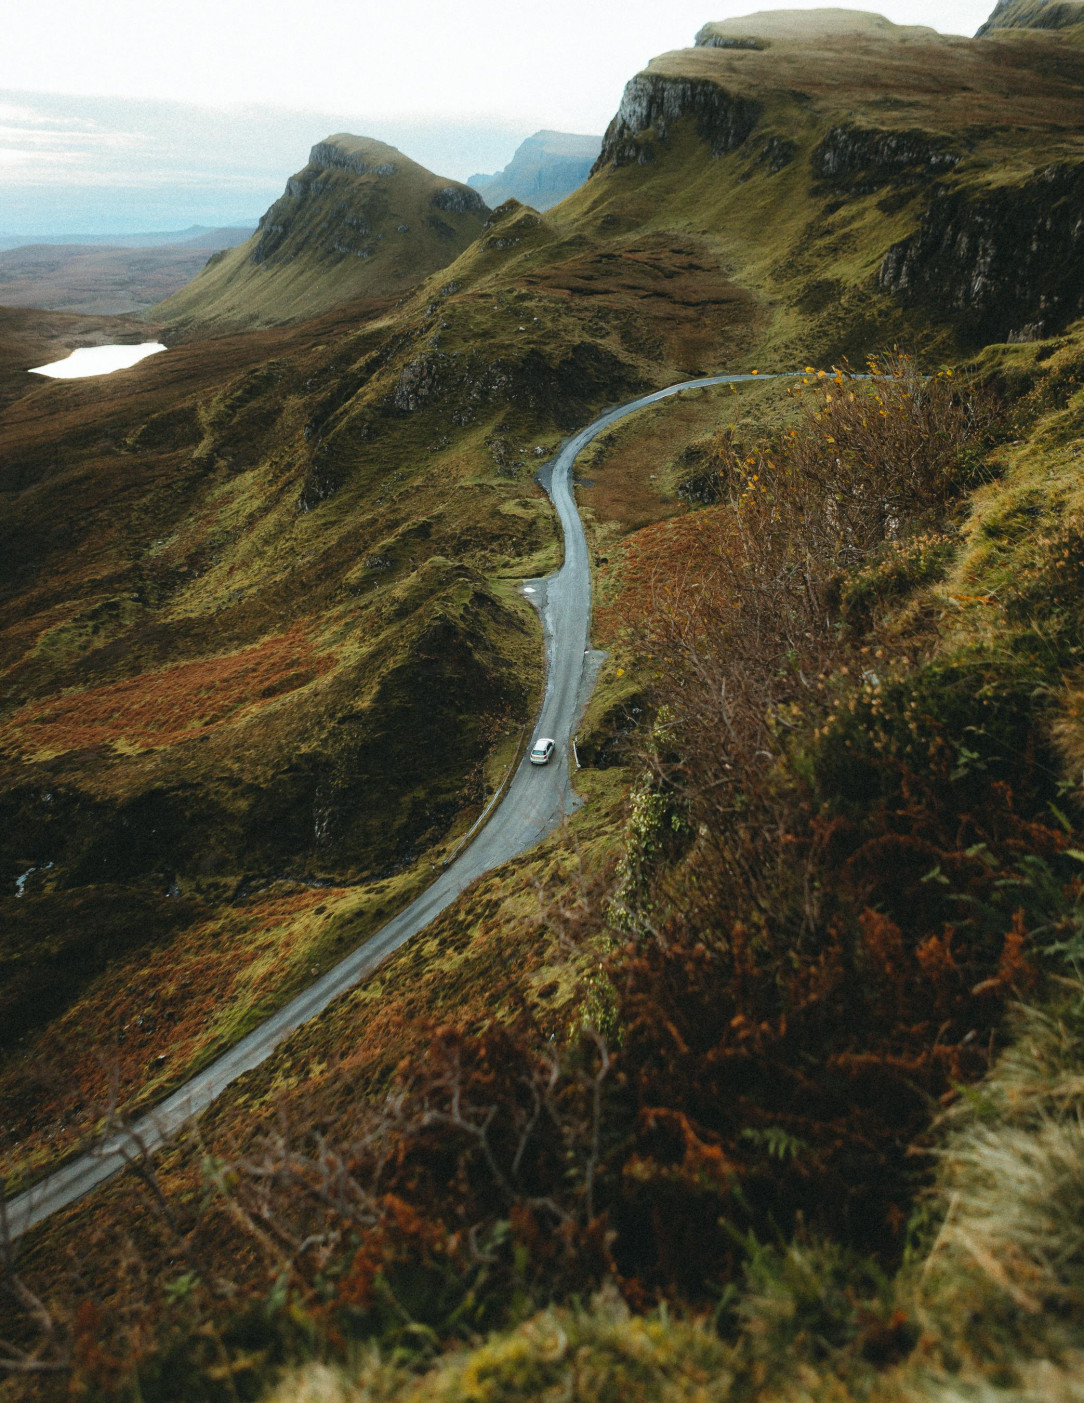 One of the many scenic roads on the Isle of Skye